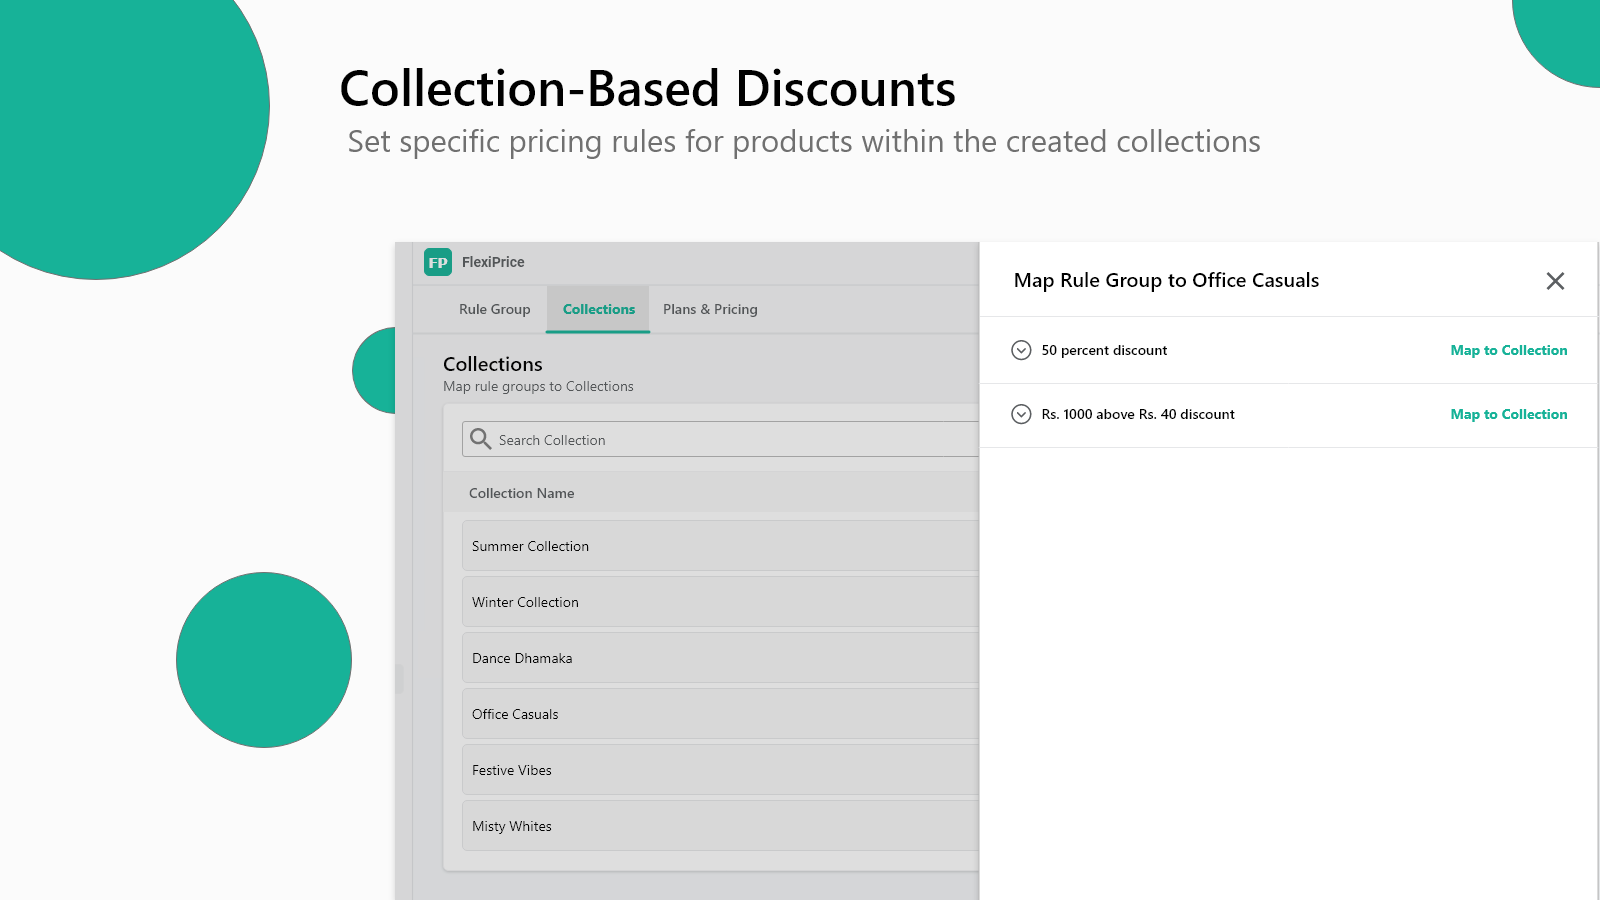 FlexiPrice - Collection Based Discounts